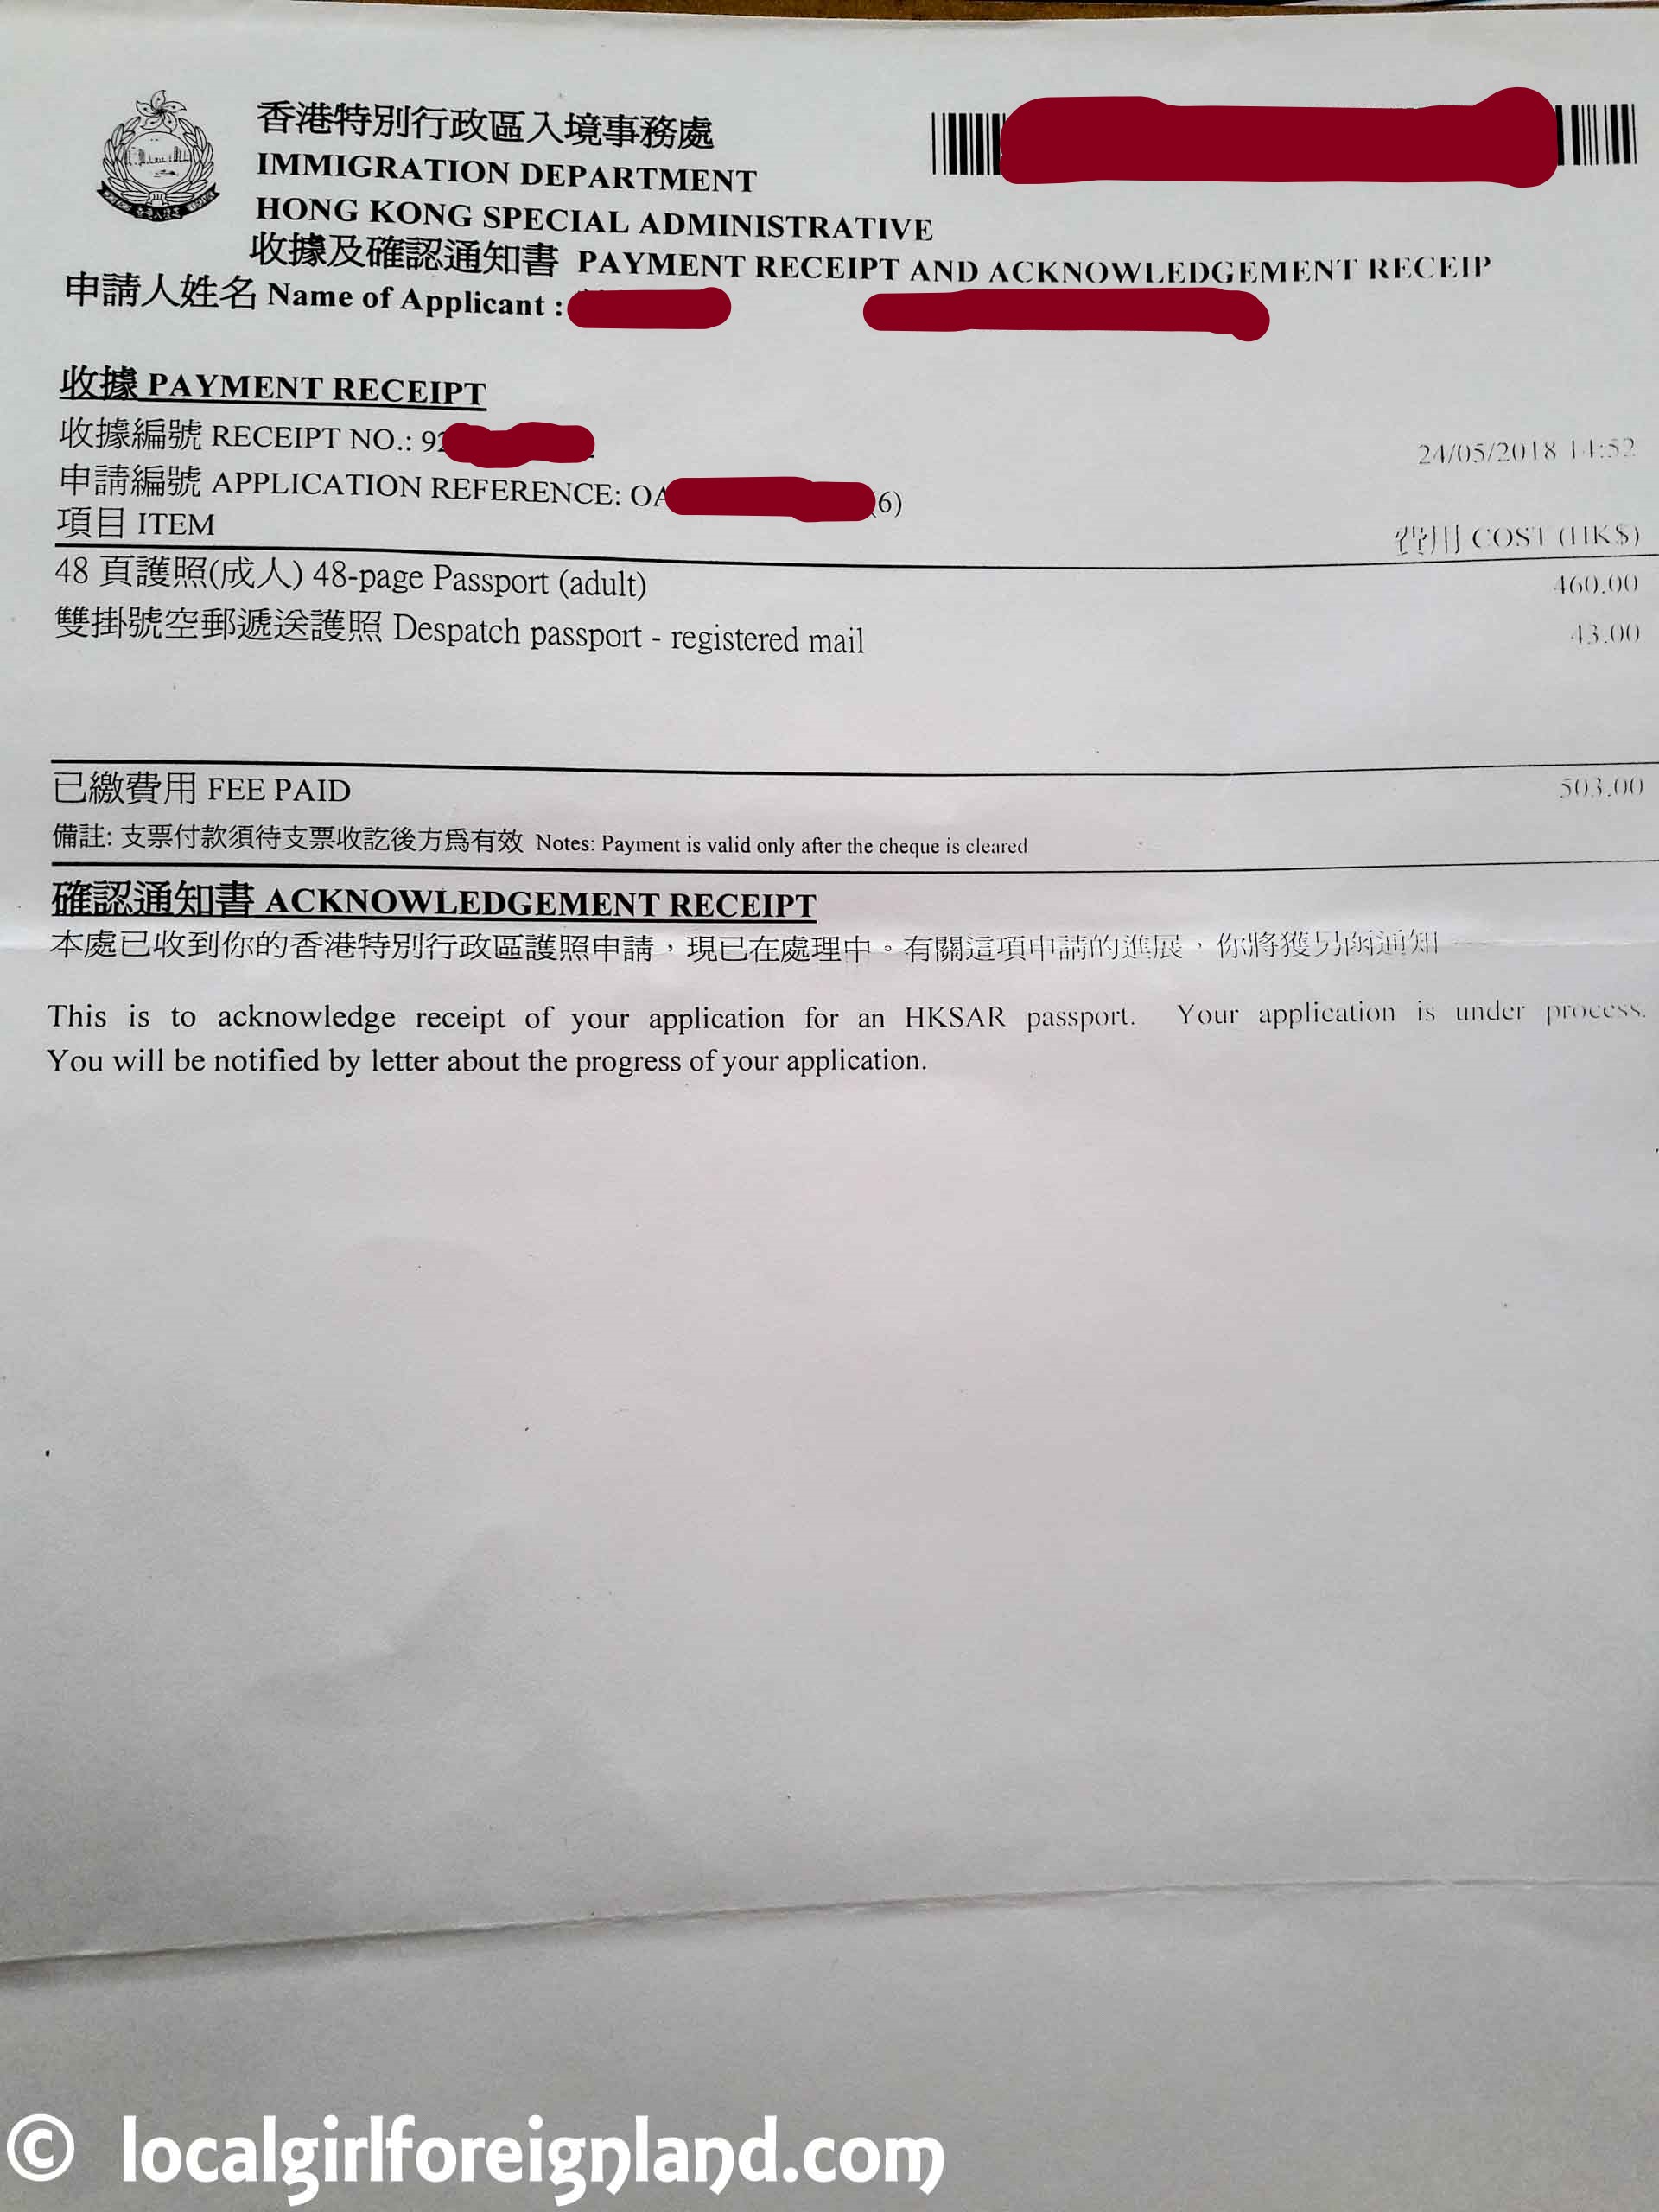 Payment receipt and acknowledgement receipt - Immigration department Hong Kong Special Administrative